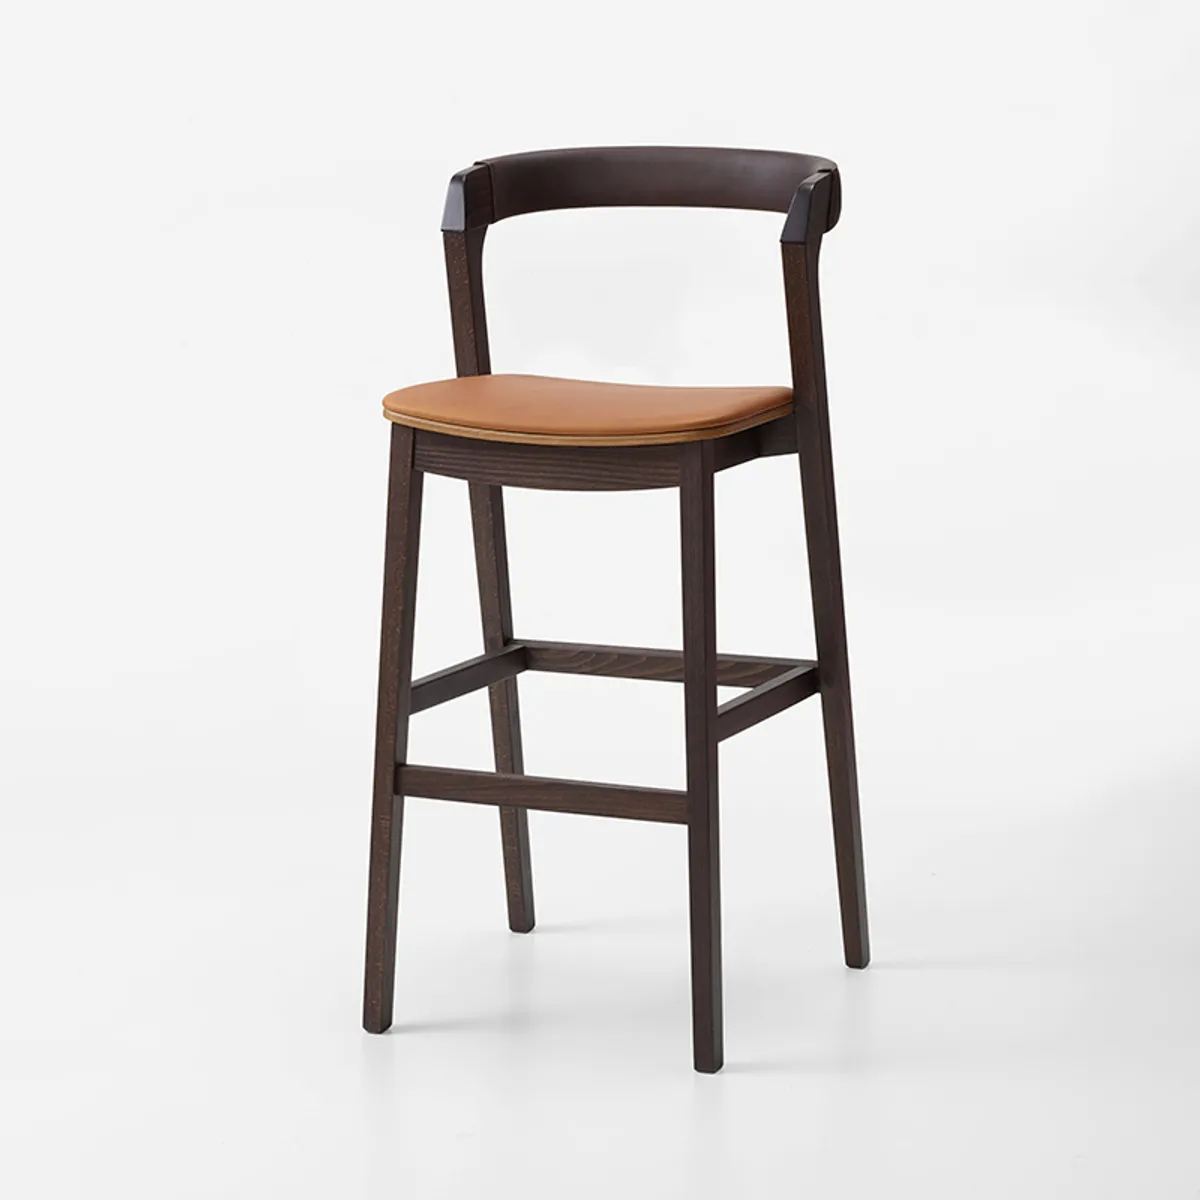 Crest Bar Stool Cafe Furniture Inside Out Contracts